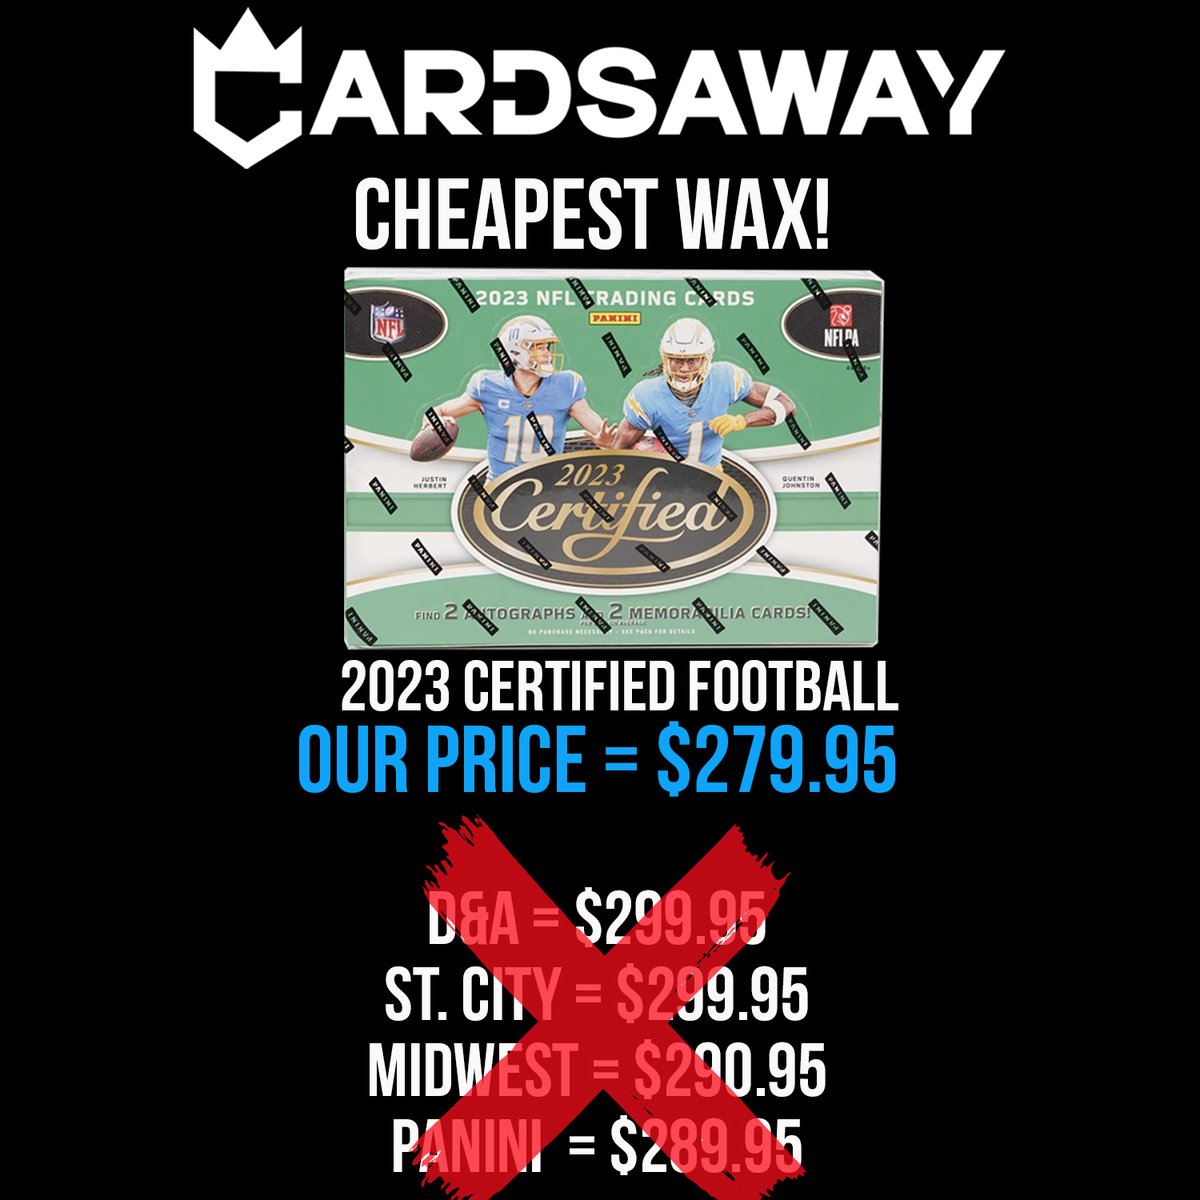 We always strive to have the best possible prices for our community 🤝 #thehobby DM us here or check out our website cardsawaysports.com